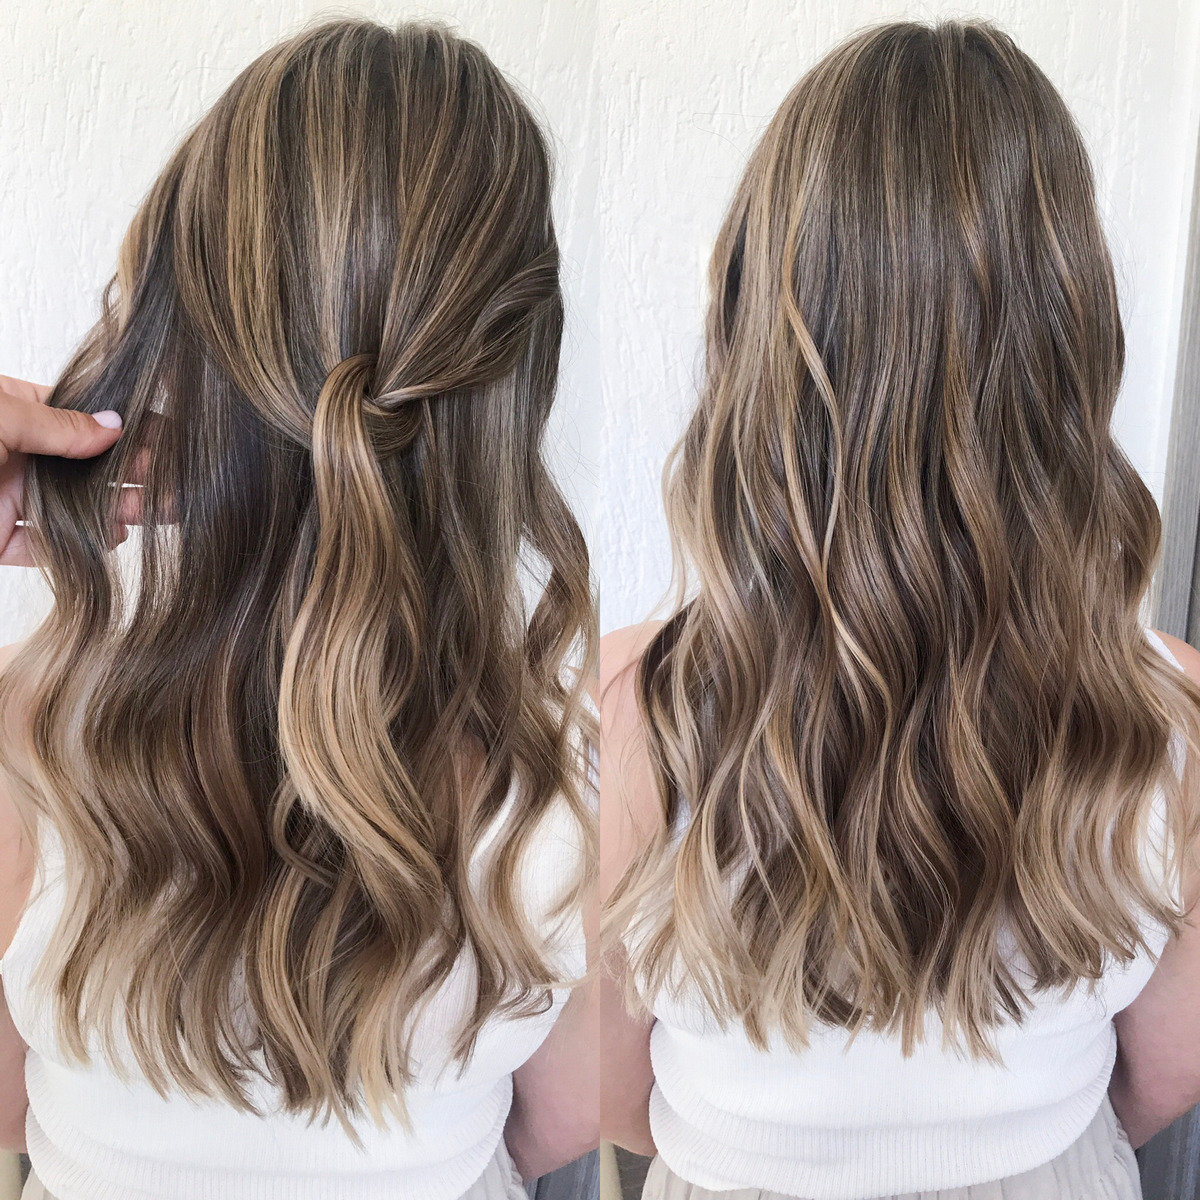 Professional hairstyle with balayage hair color. 